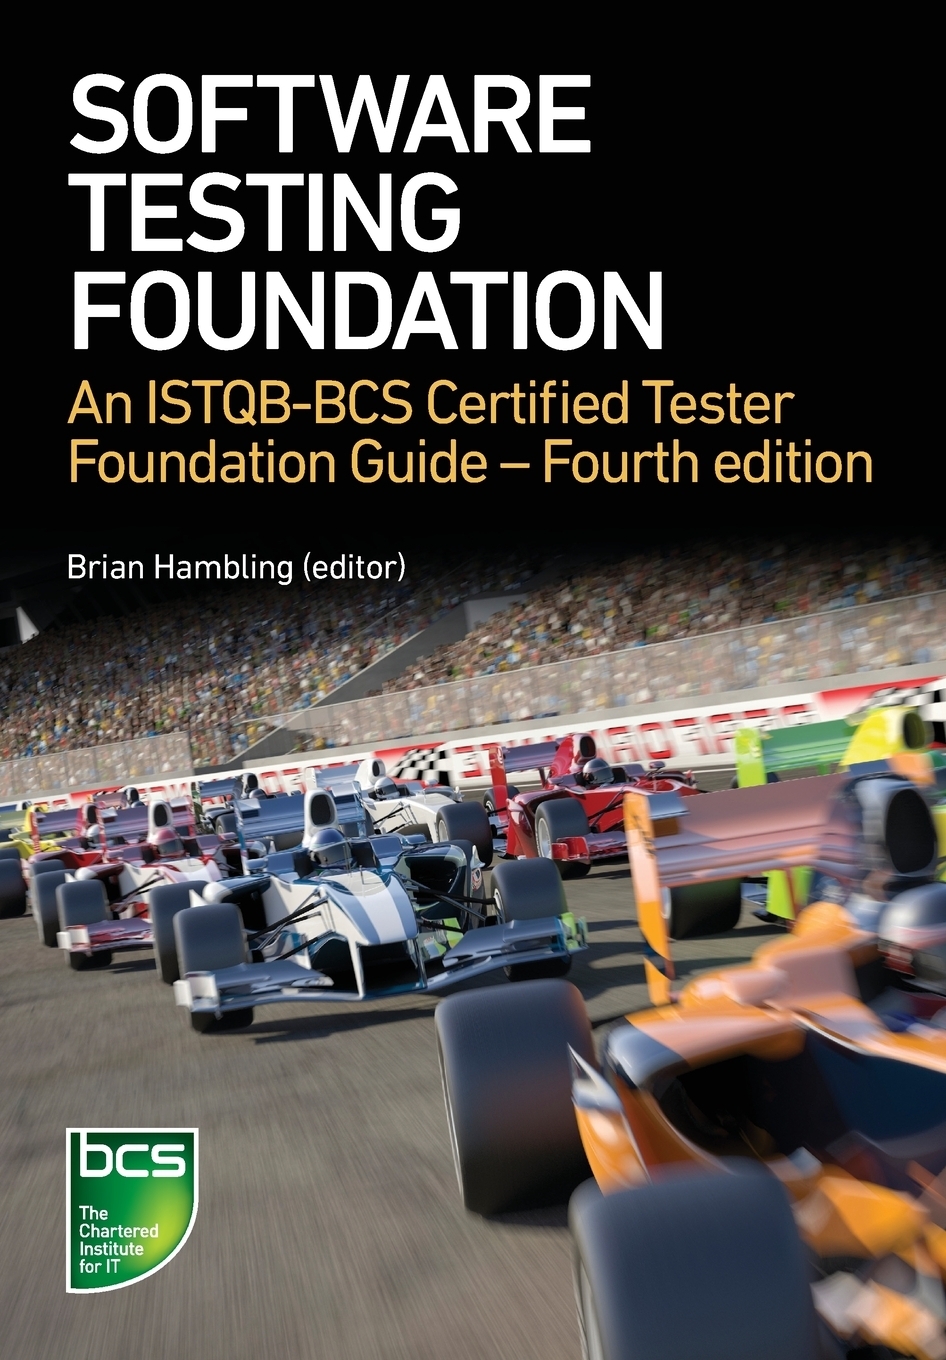 Software Testing. An ISTQB-BCS Certified Tester Foundation guide - 4th edition